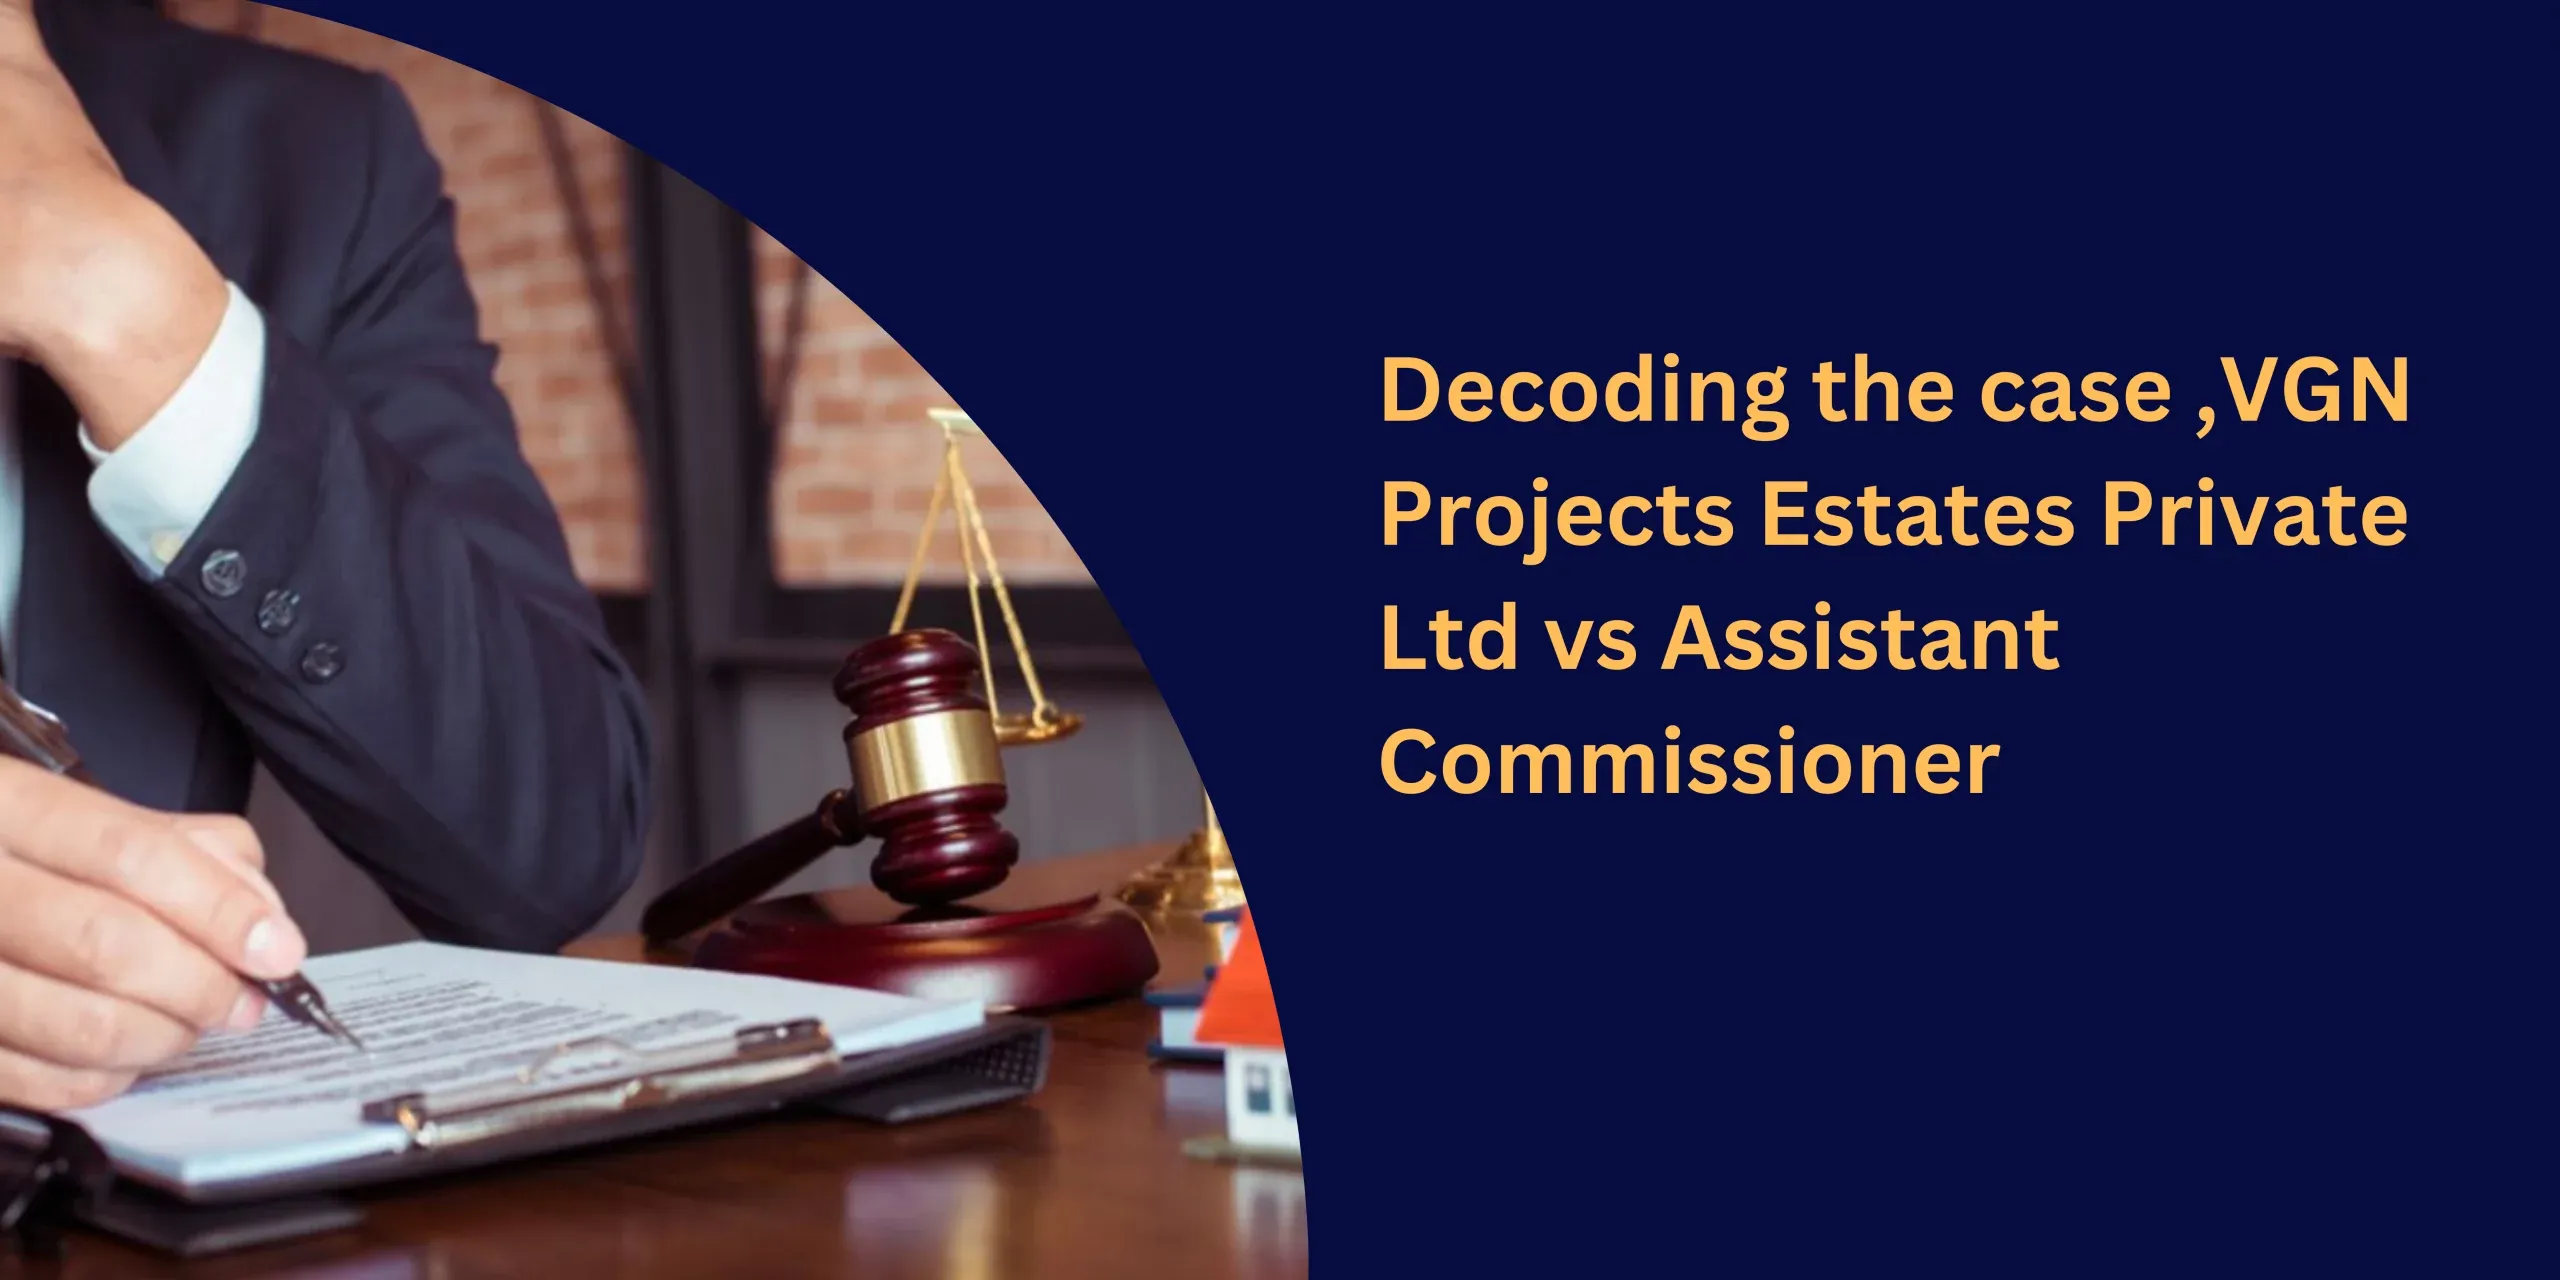 Decoding the Judgement of the case of VGN Projects Estates Private Ltd vs Assistant Commissioner.